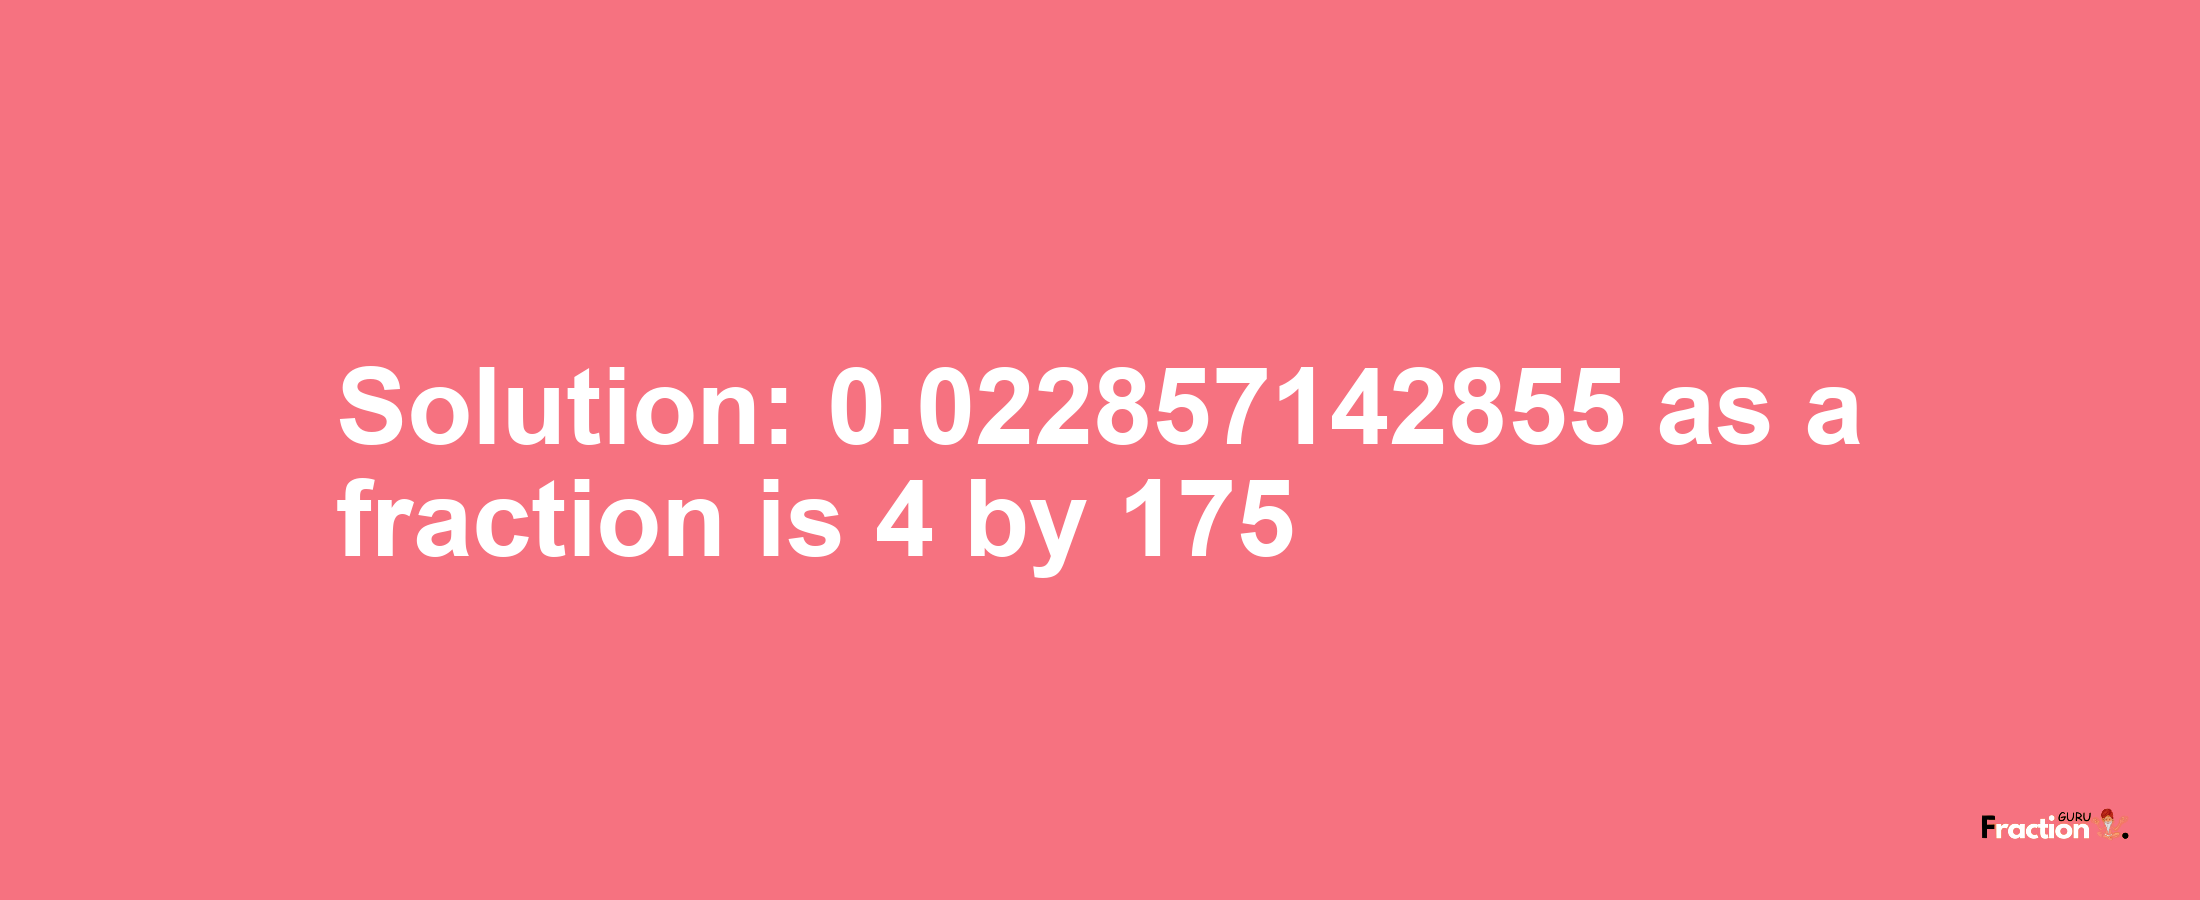 Solution:0.022857142855 as a fraction is 4/175